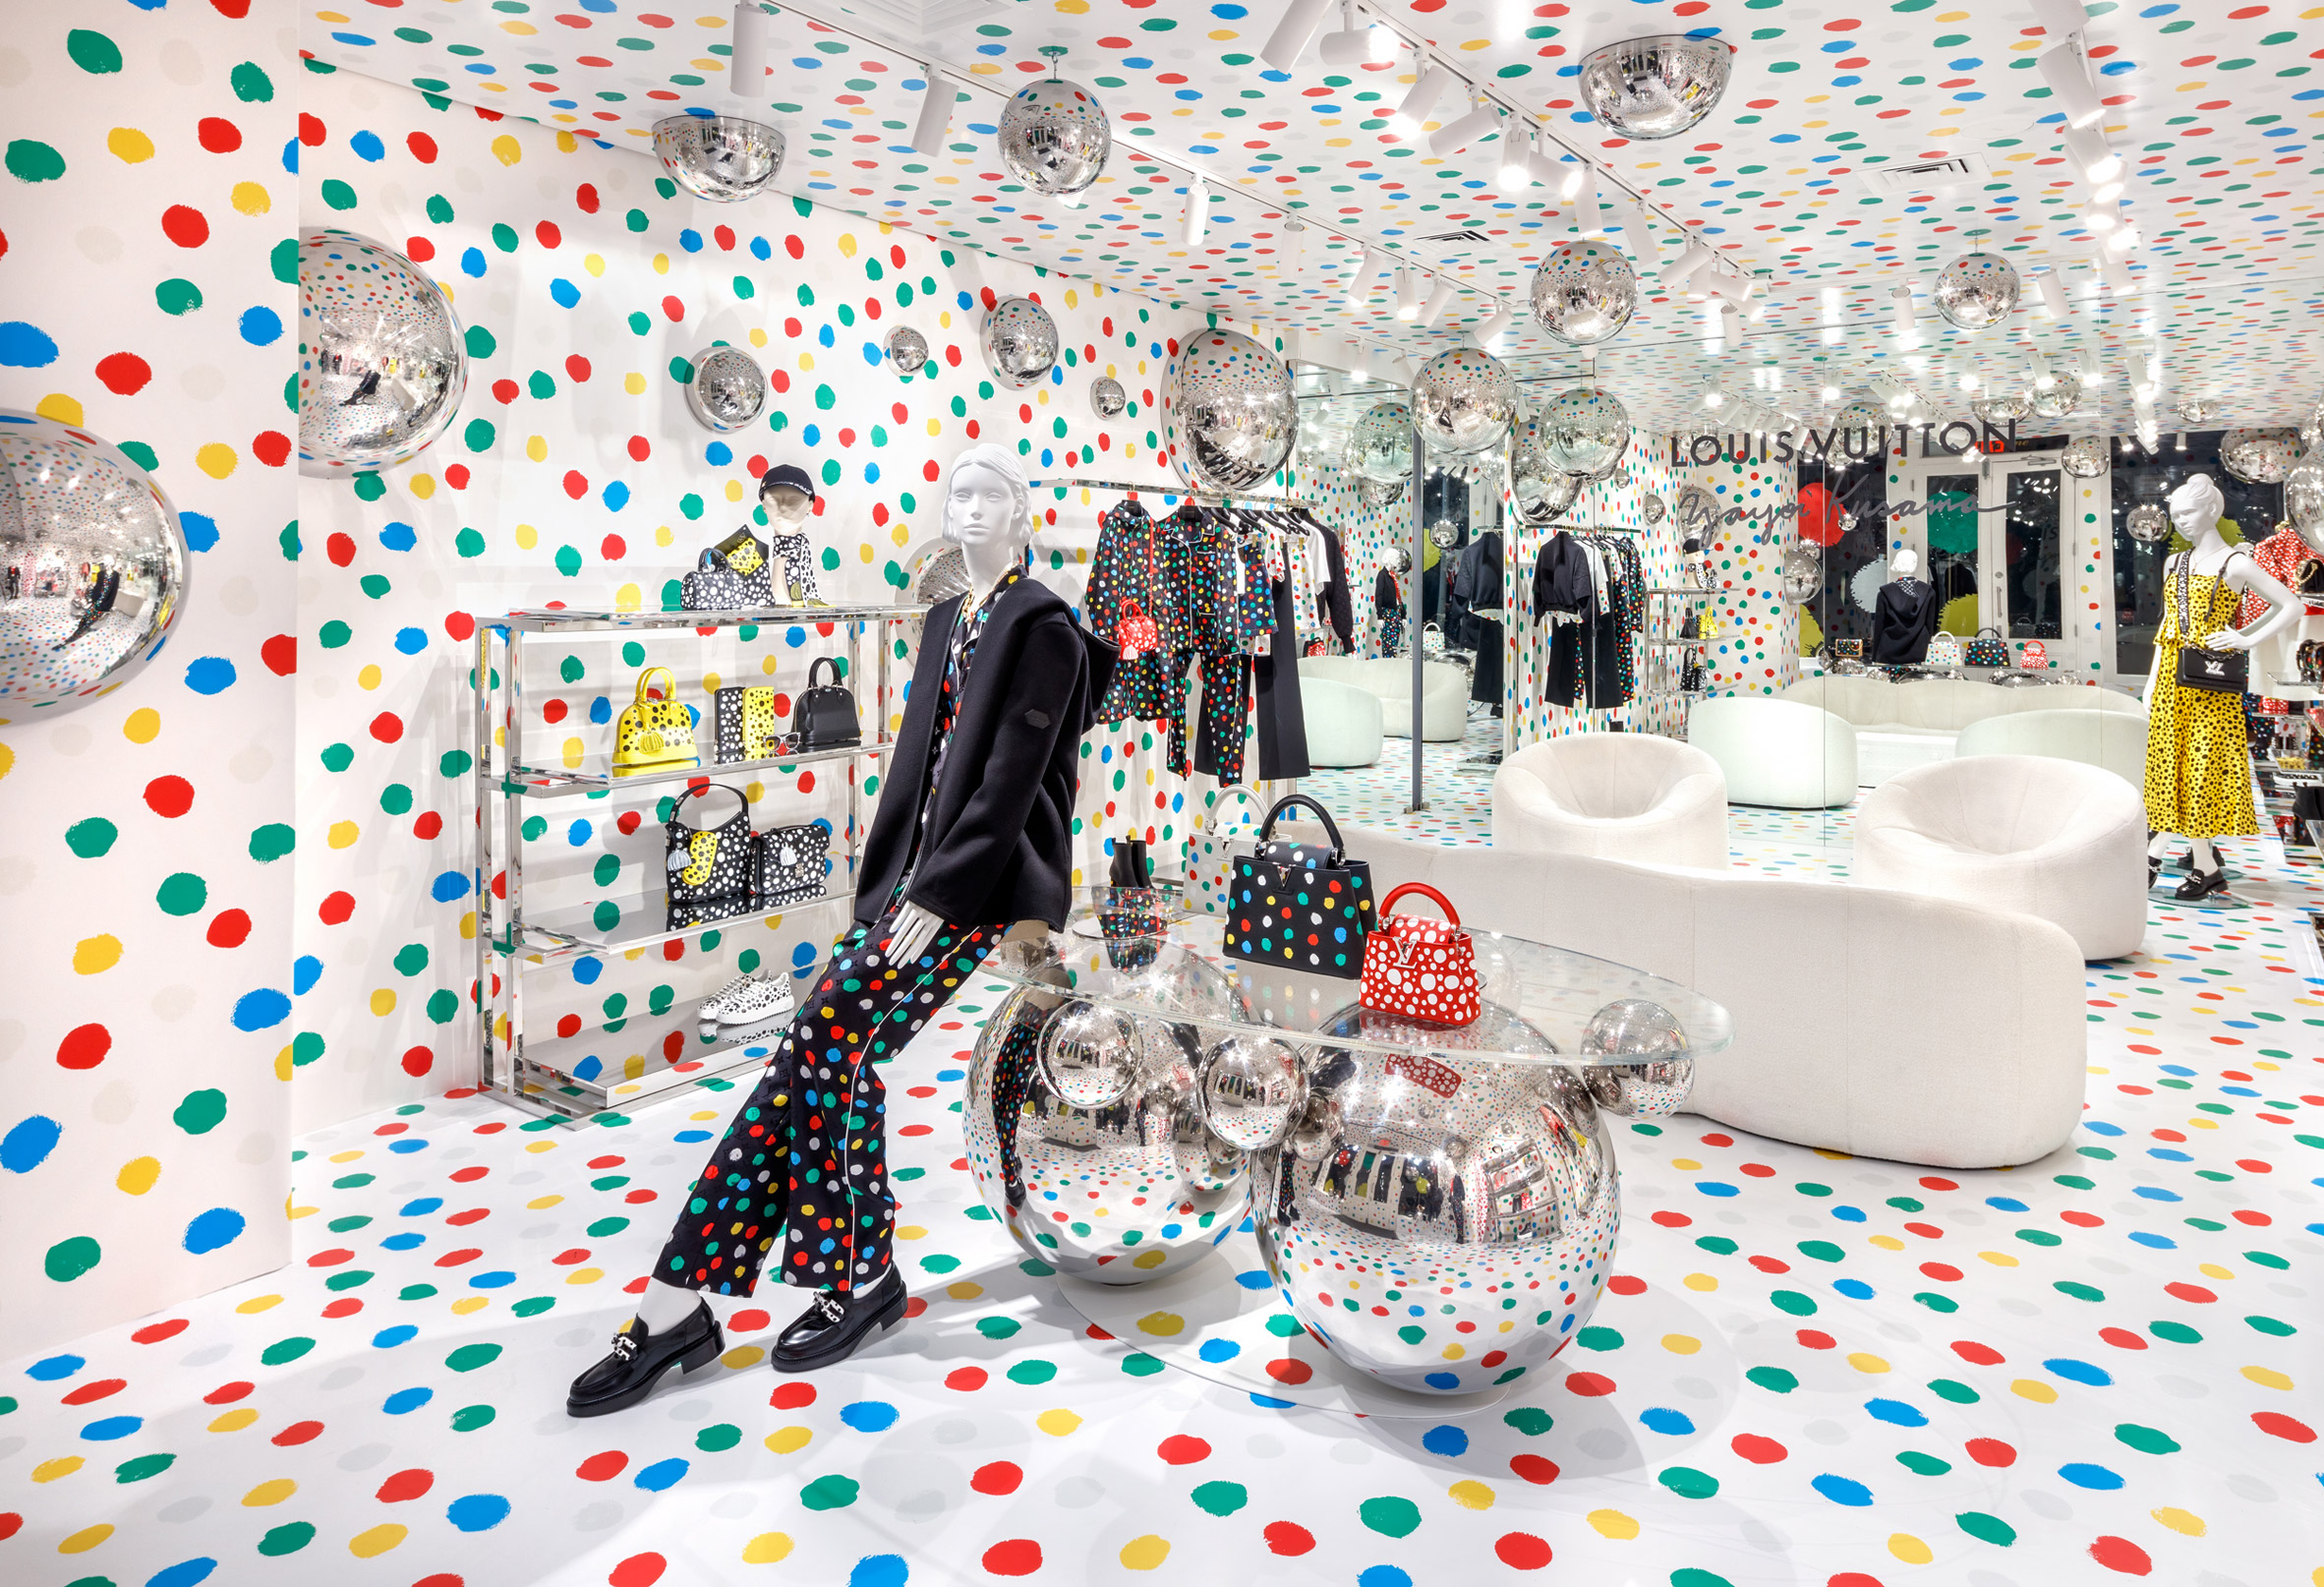 Interior image of the pop up Louis Vuitton and Yayoi Kusama store